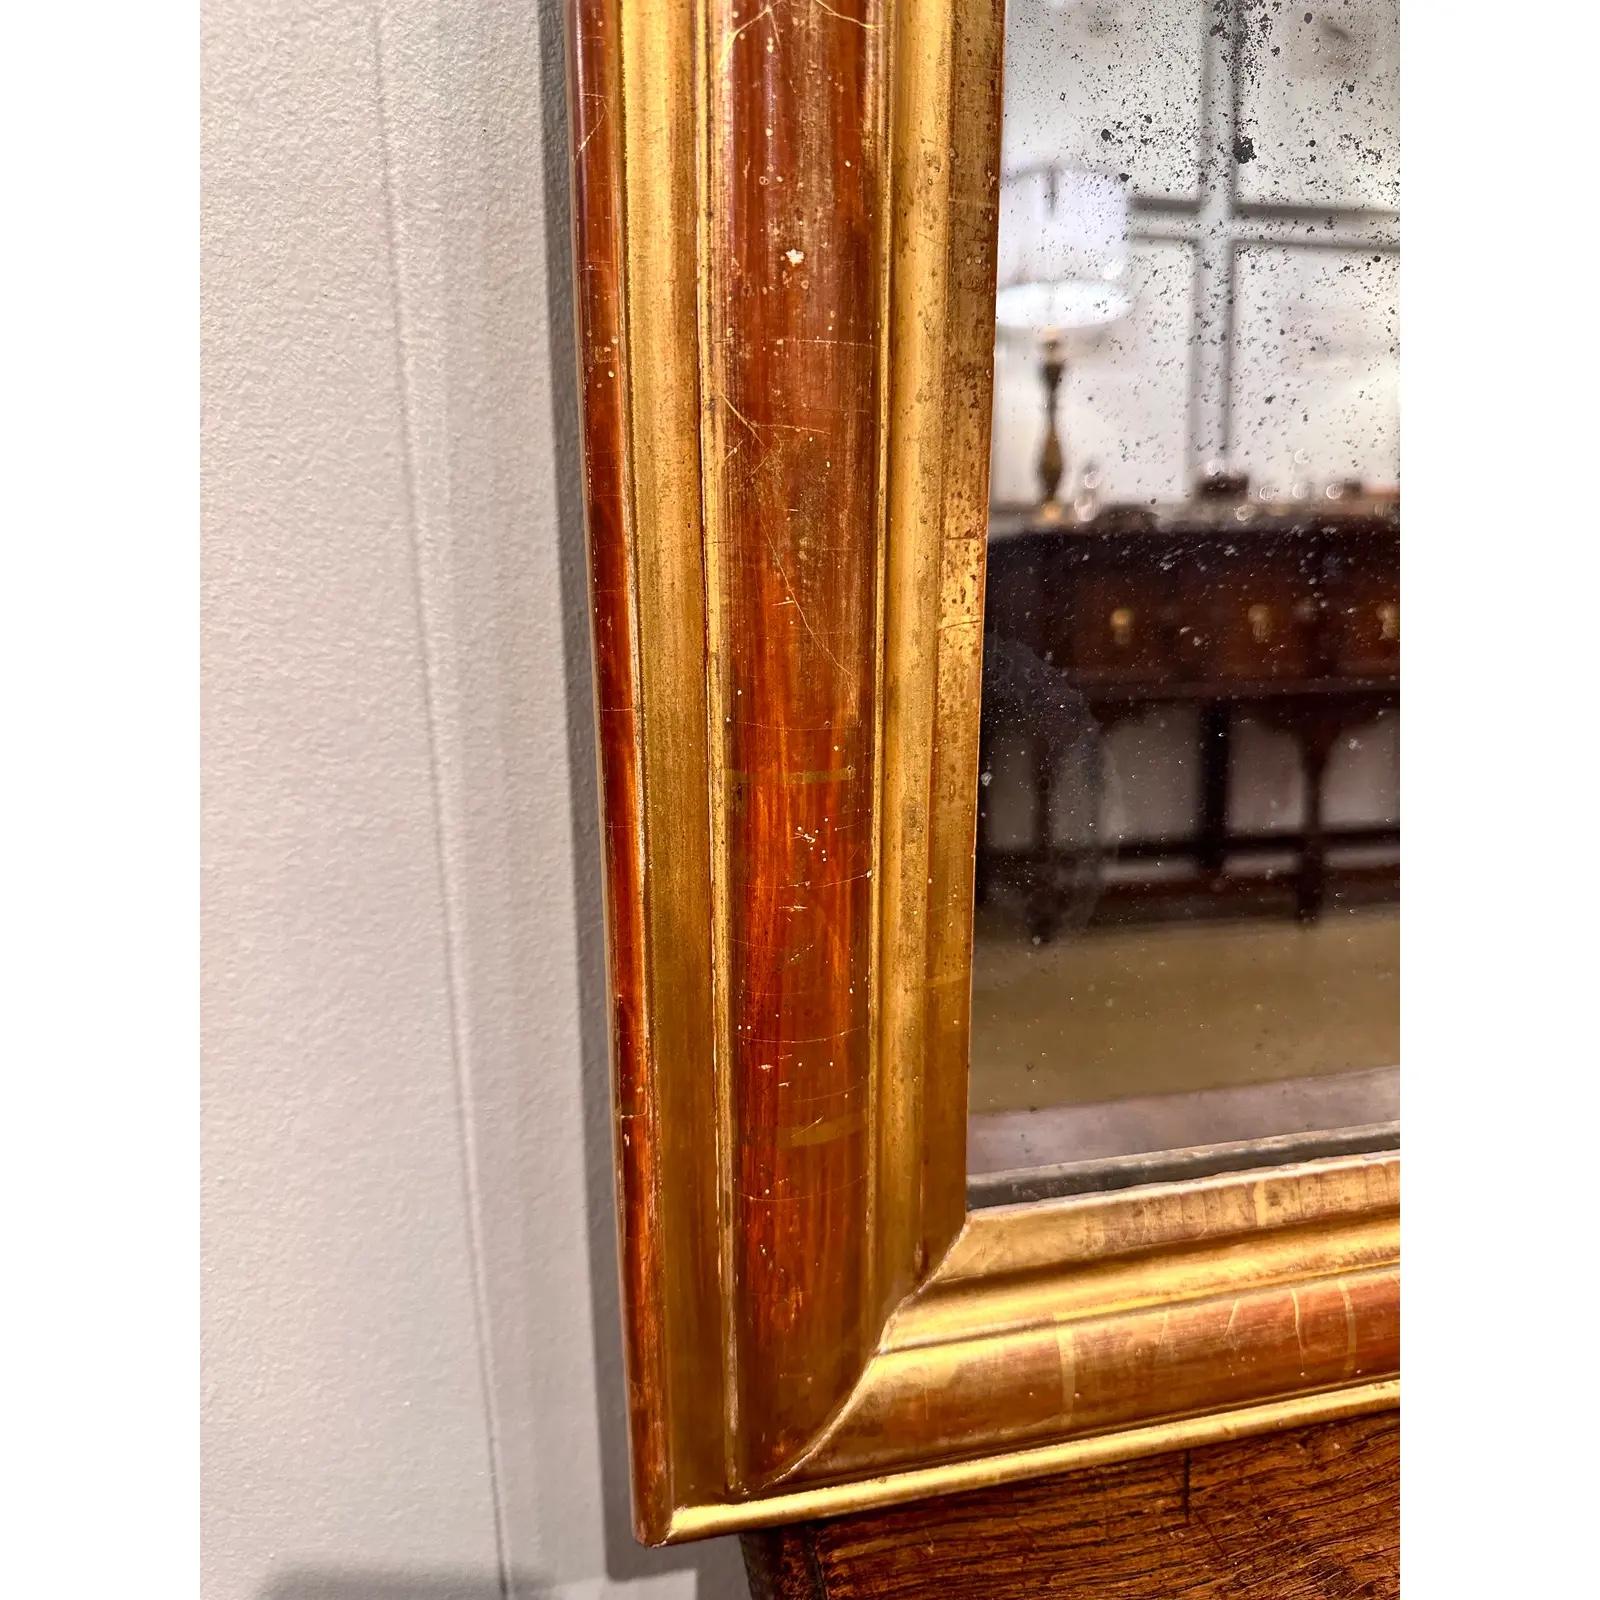 This is a beautiful Louis Philippe Mirror From the 1880s! This mirror is simple in style and yet still has plenty of character. It has also aged nicely with the gold has wearing off enough to show lovely patina and age. This mirror would work well